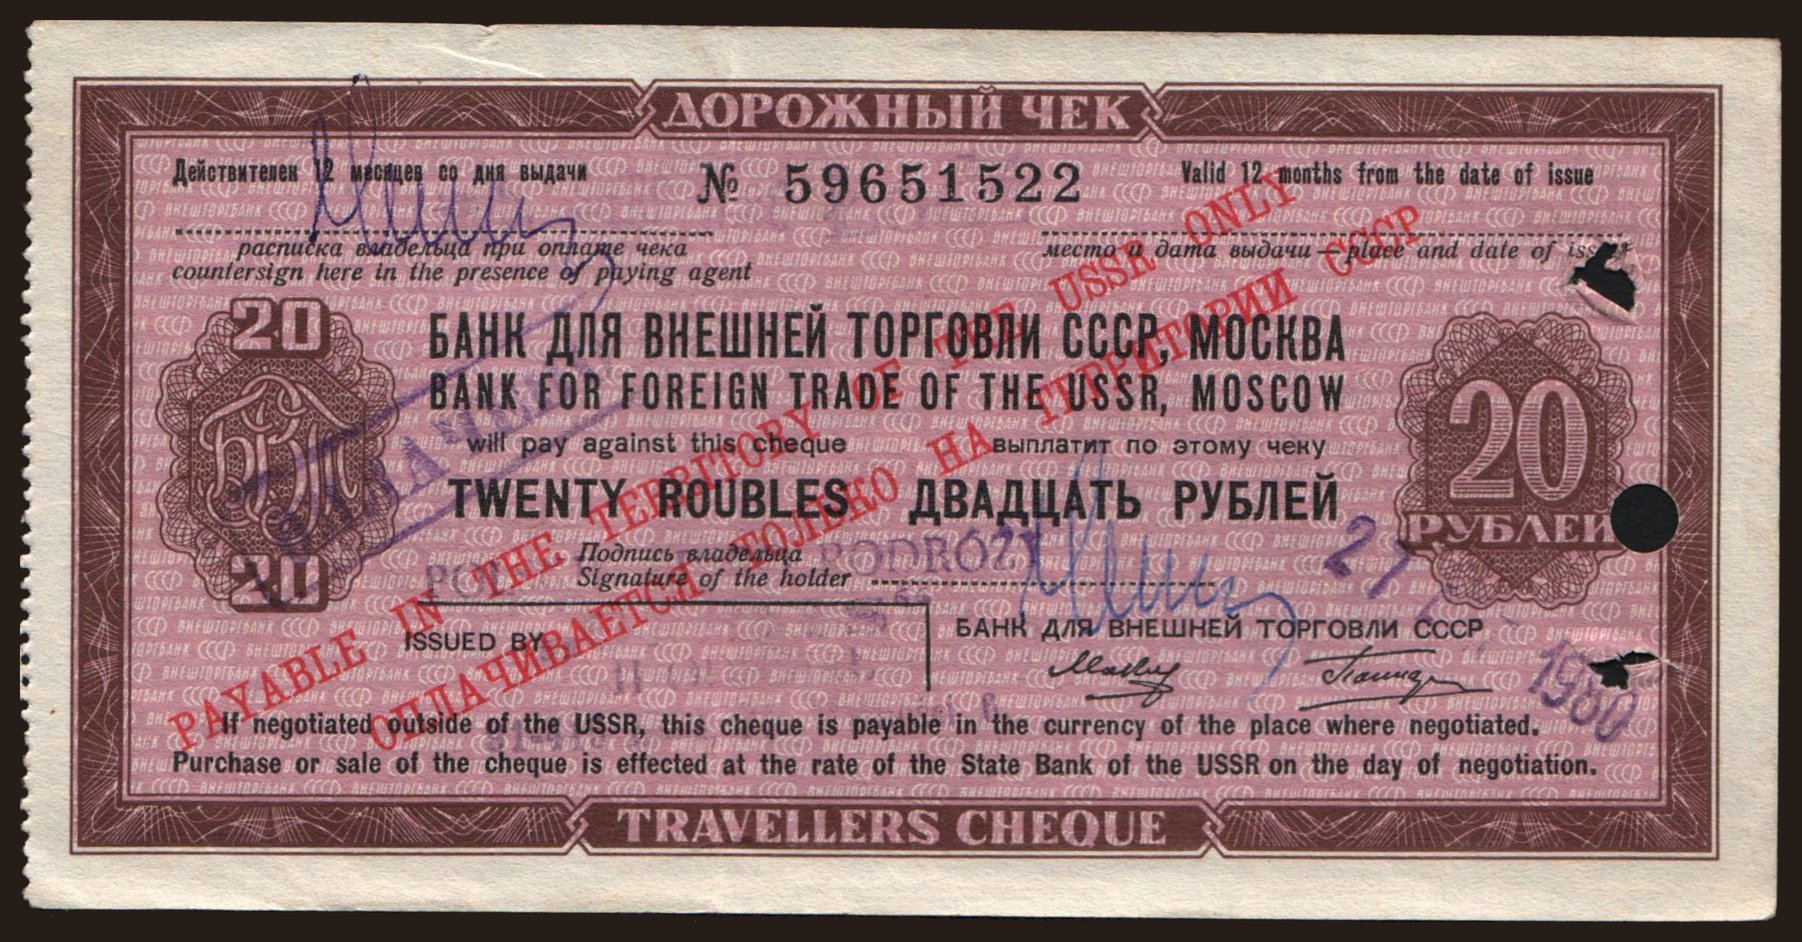 Travellers cheque, Bank for Foreign Trade, 100 rubel, 1974